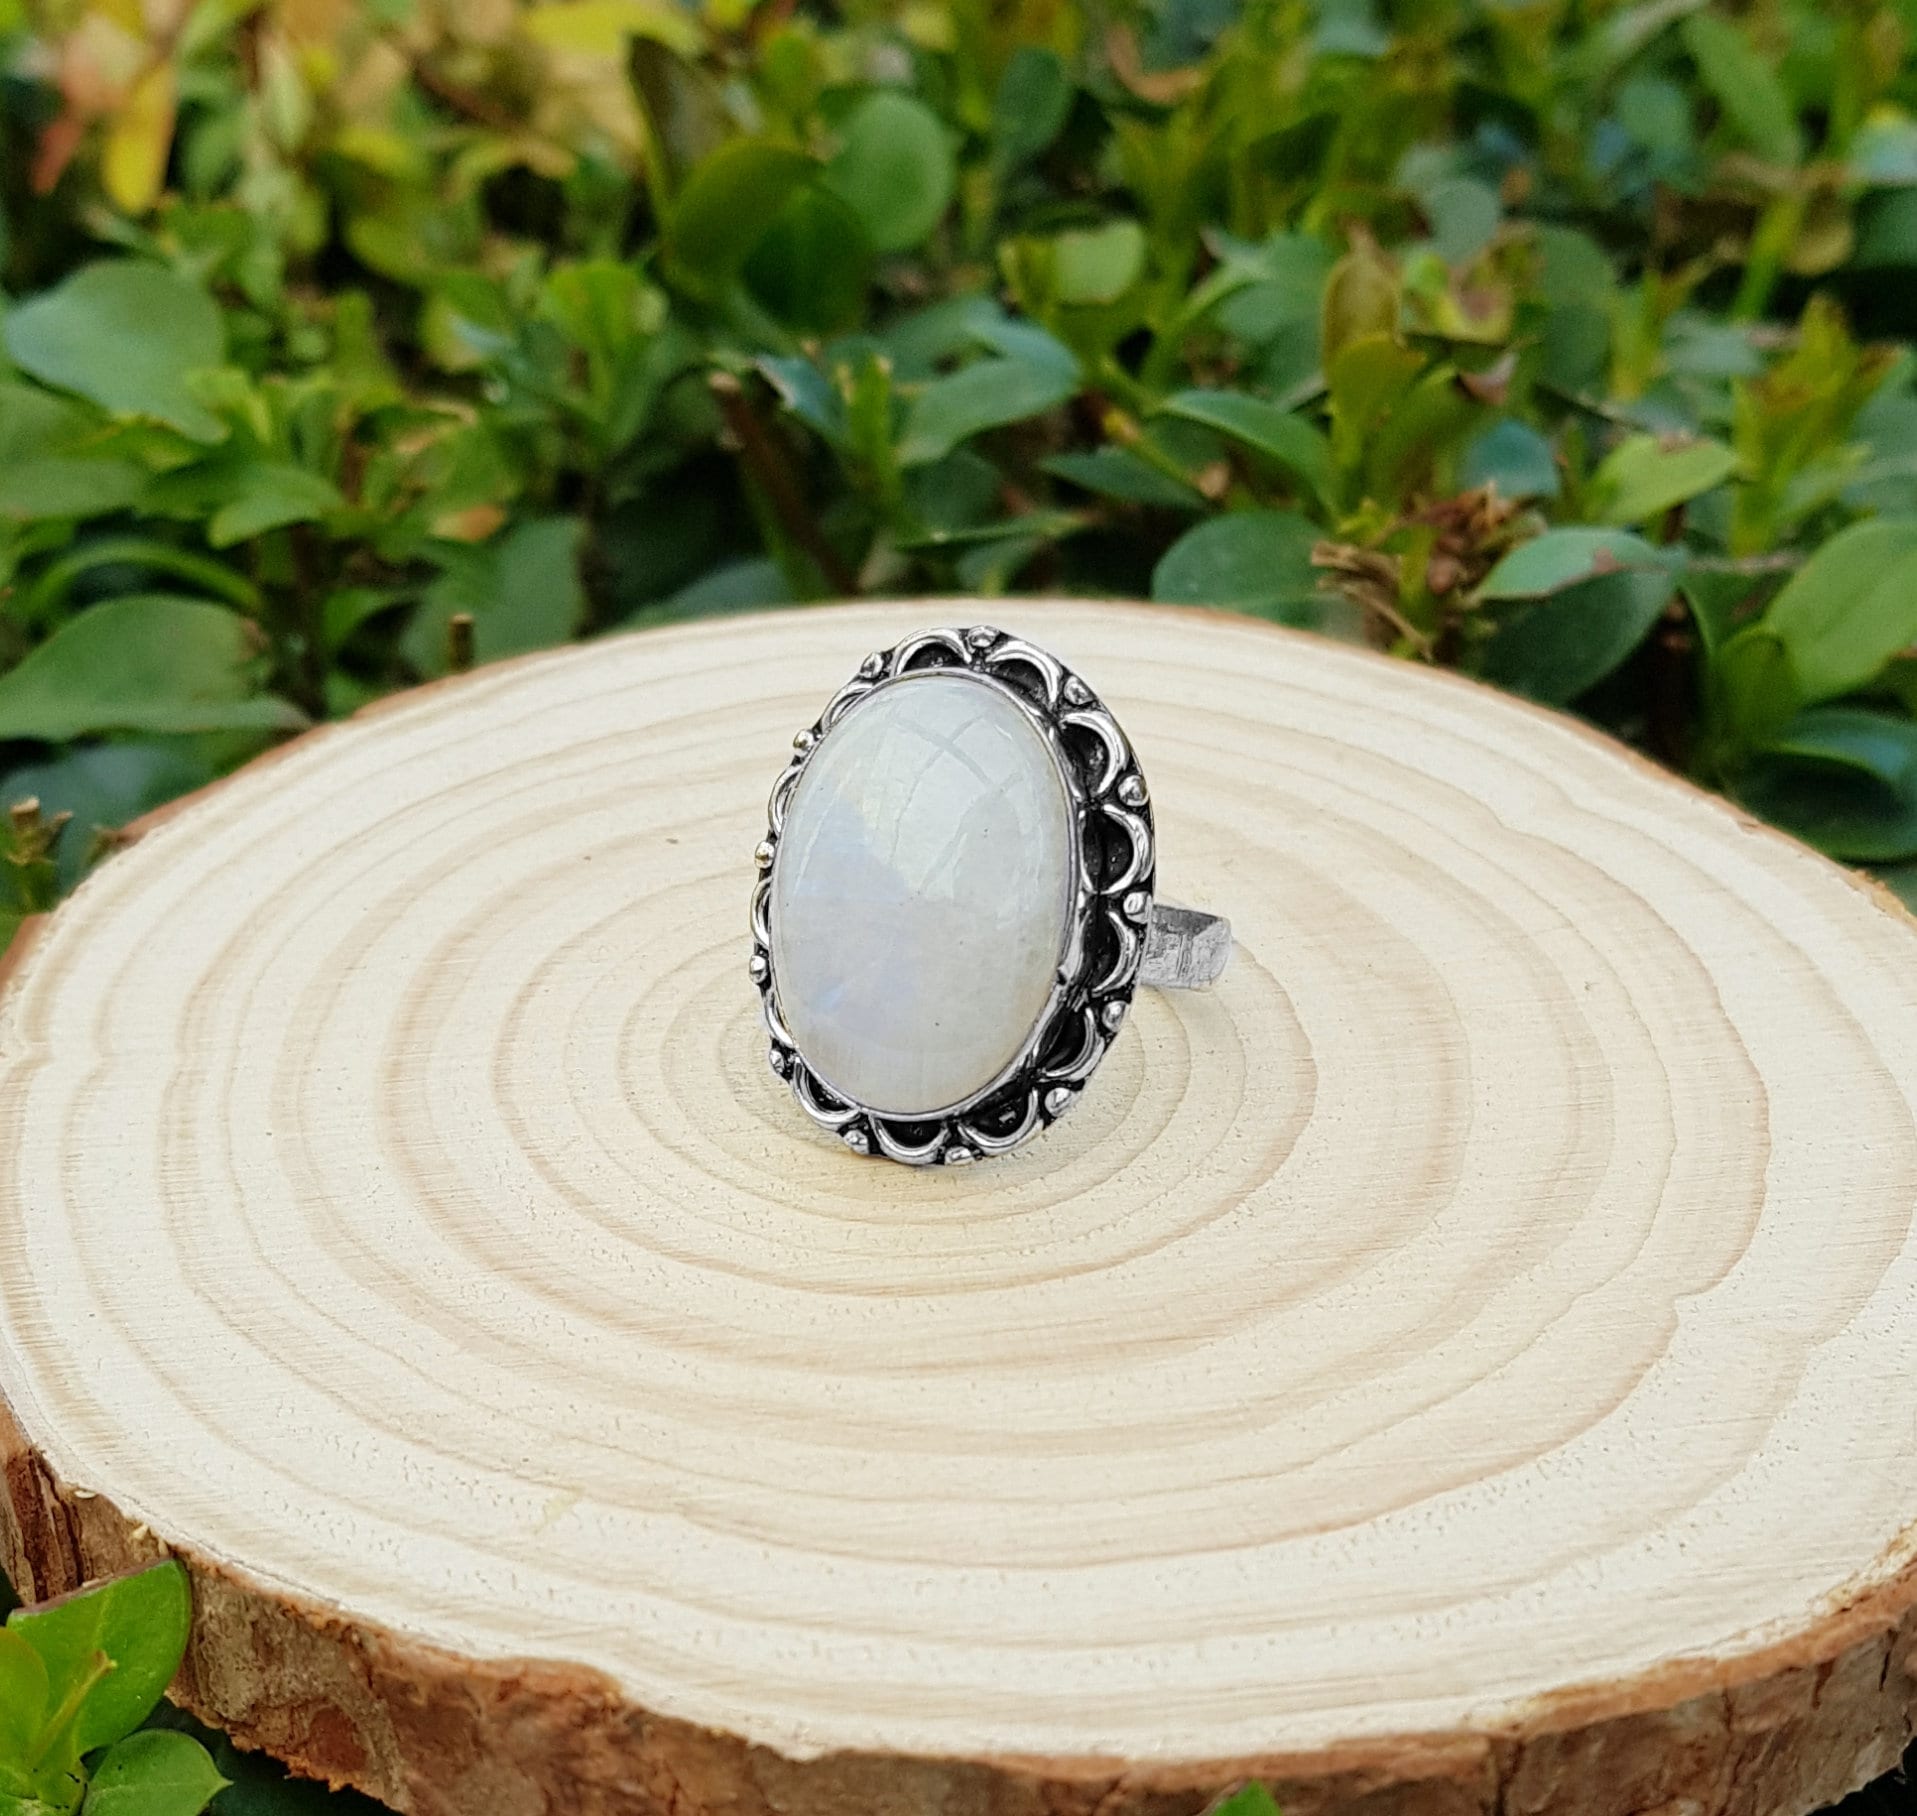 Rainbow Moonstone Statement Ring Sterling Silver Boho Rings Size US 8 Unique Jewelry One Of A Kind Gift GypsyJewelry